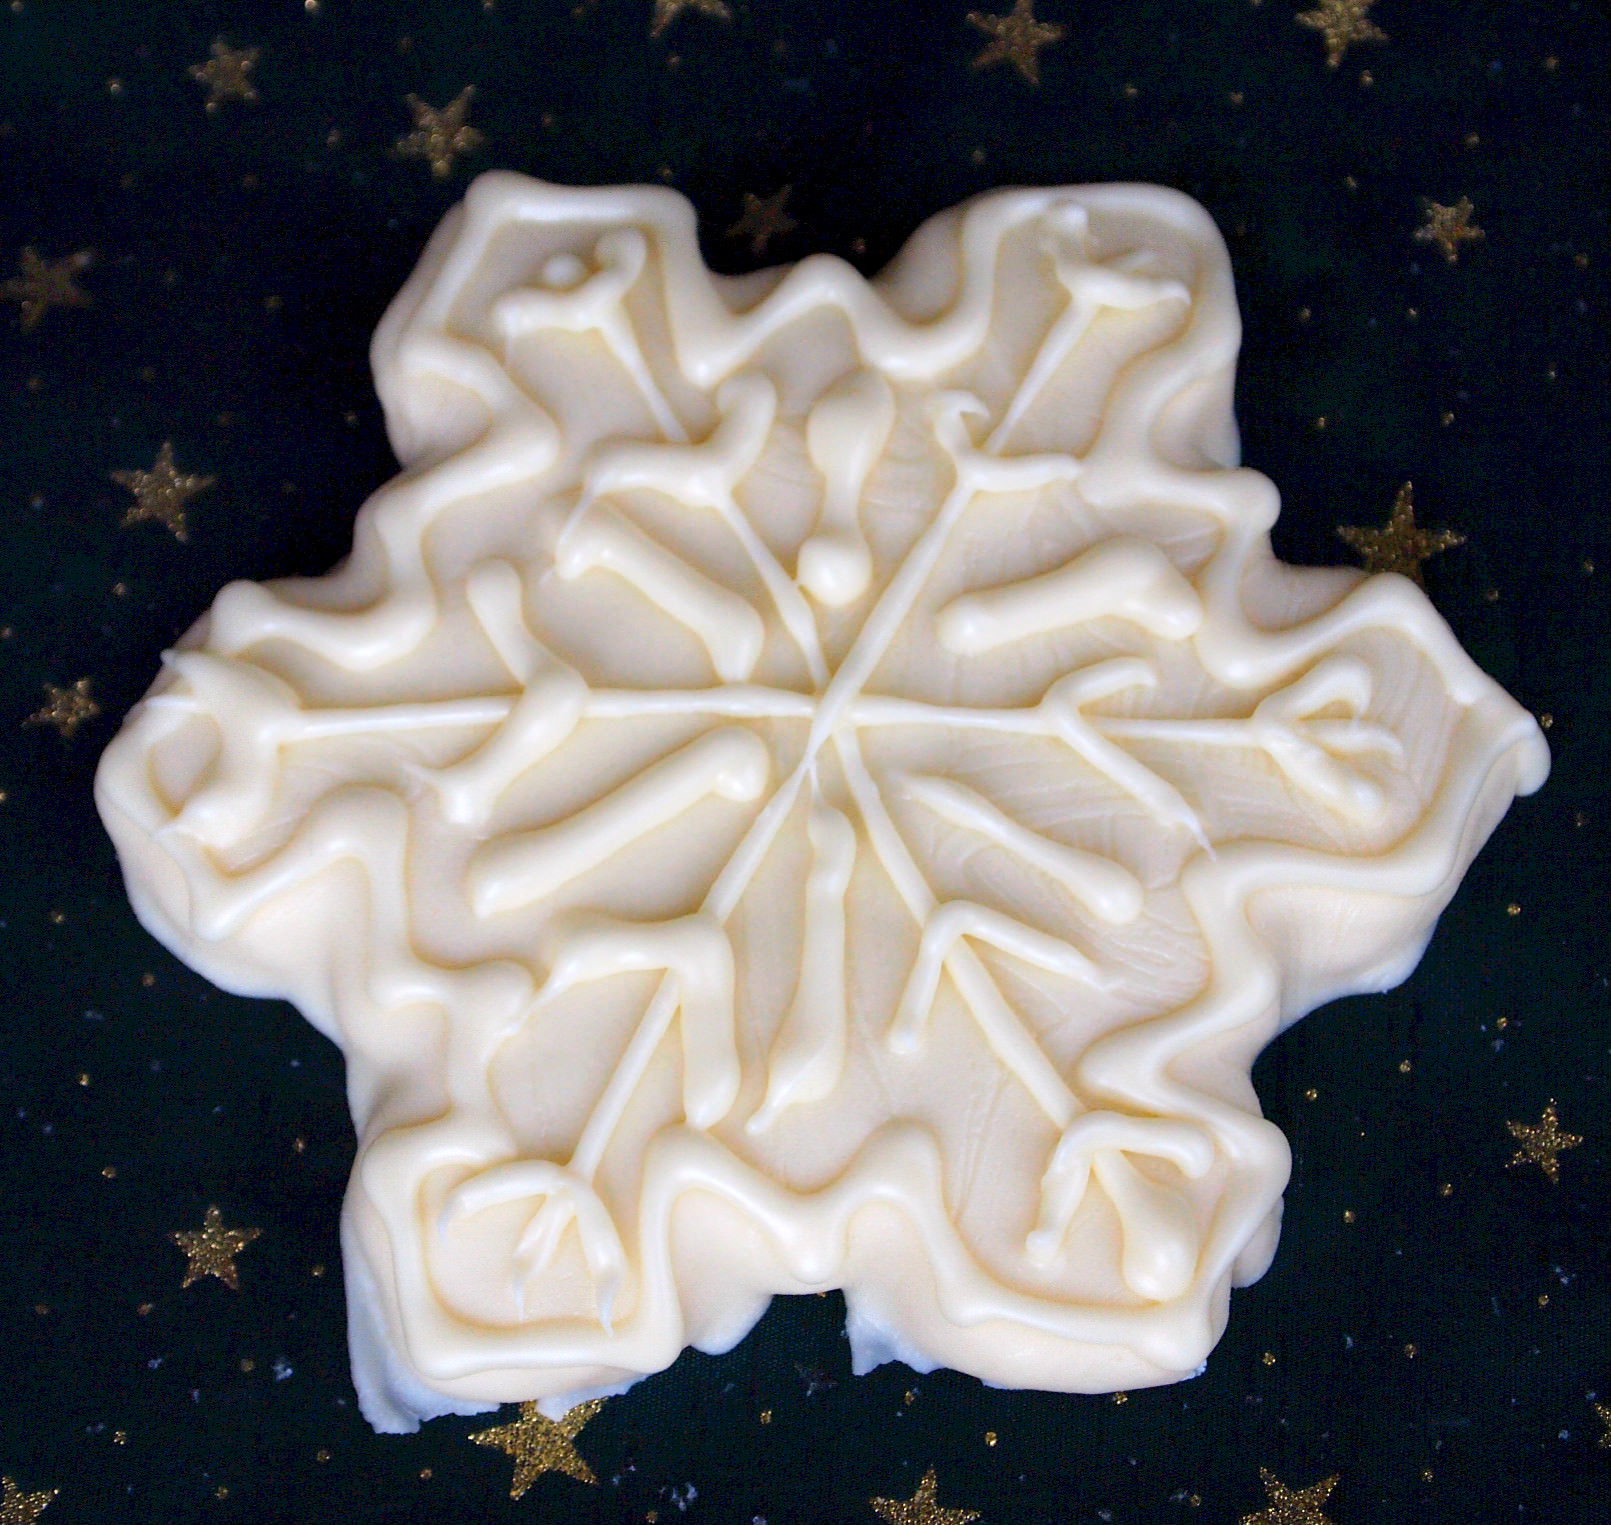 Decorated Shortbread Snowflake Cookies - Comfortably Domestic with White Chocolate standing in for royal icing.